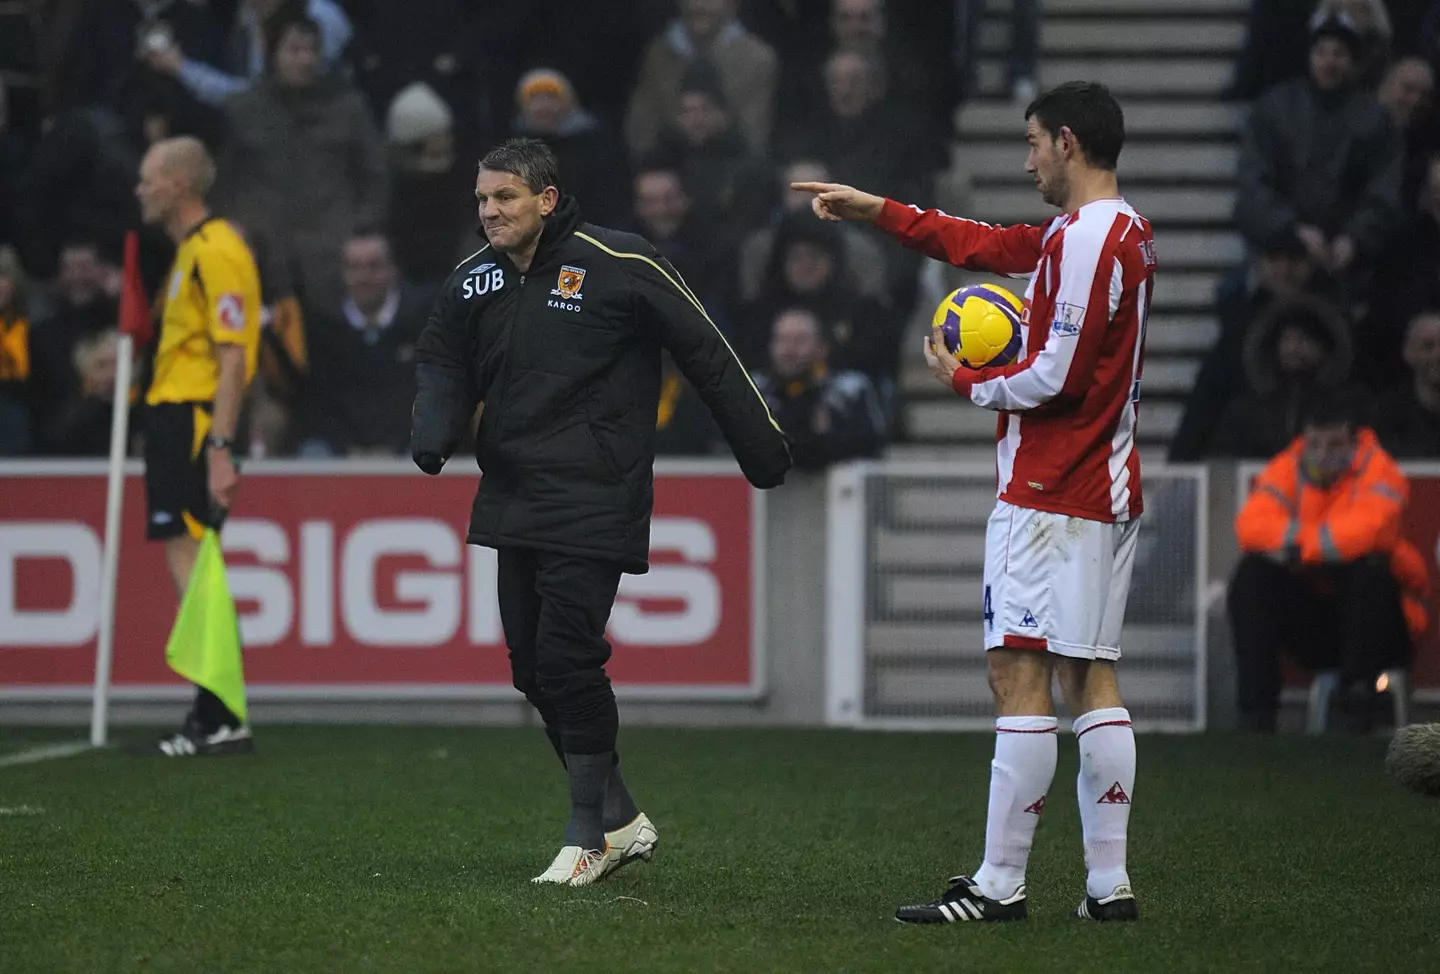 Hull's Dean Windass tried to put off Rory Delap before his throw-in. (Image